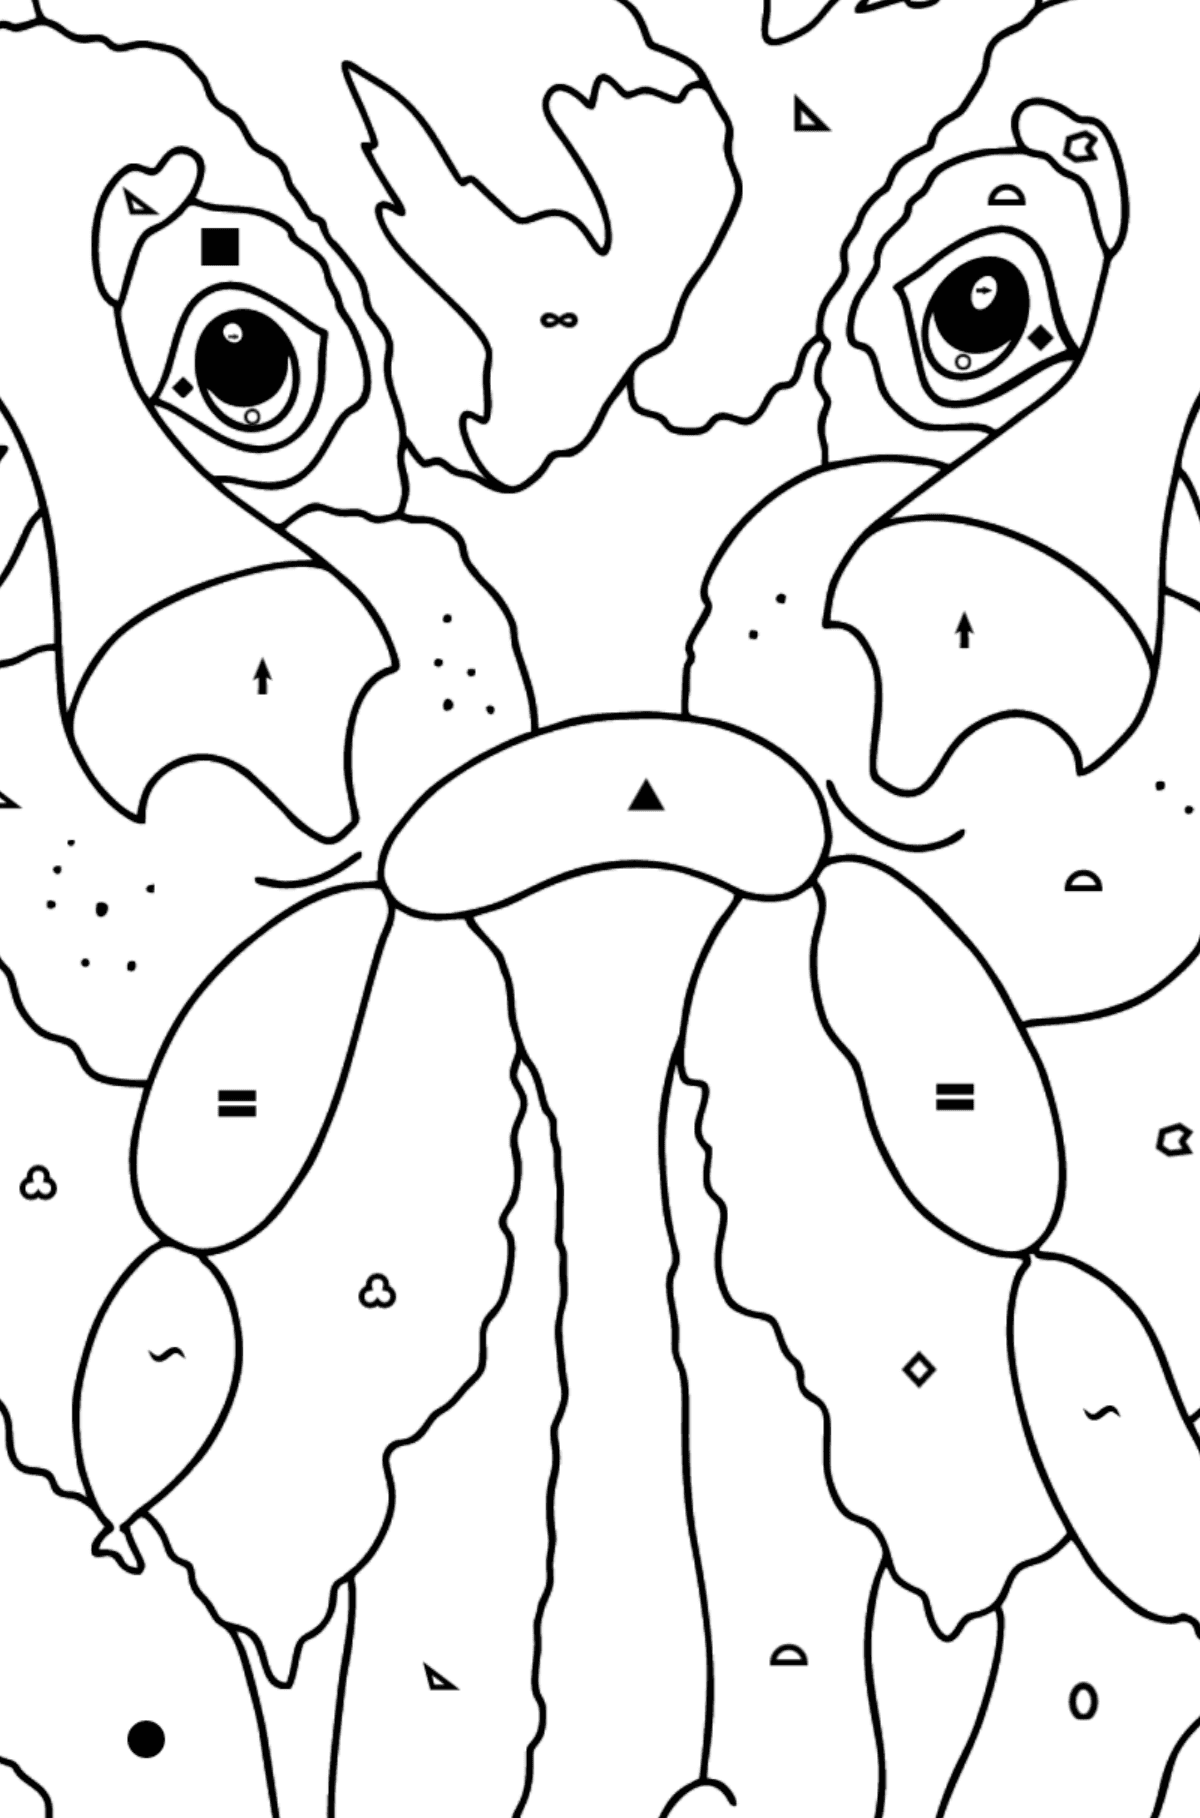 Coloring Page - Dogs Found Sausages - Coloring by Symbols and Geometric Shapes for Kids